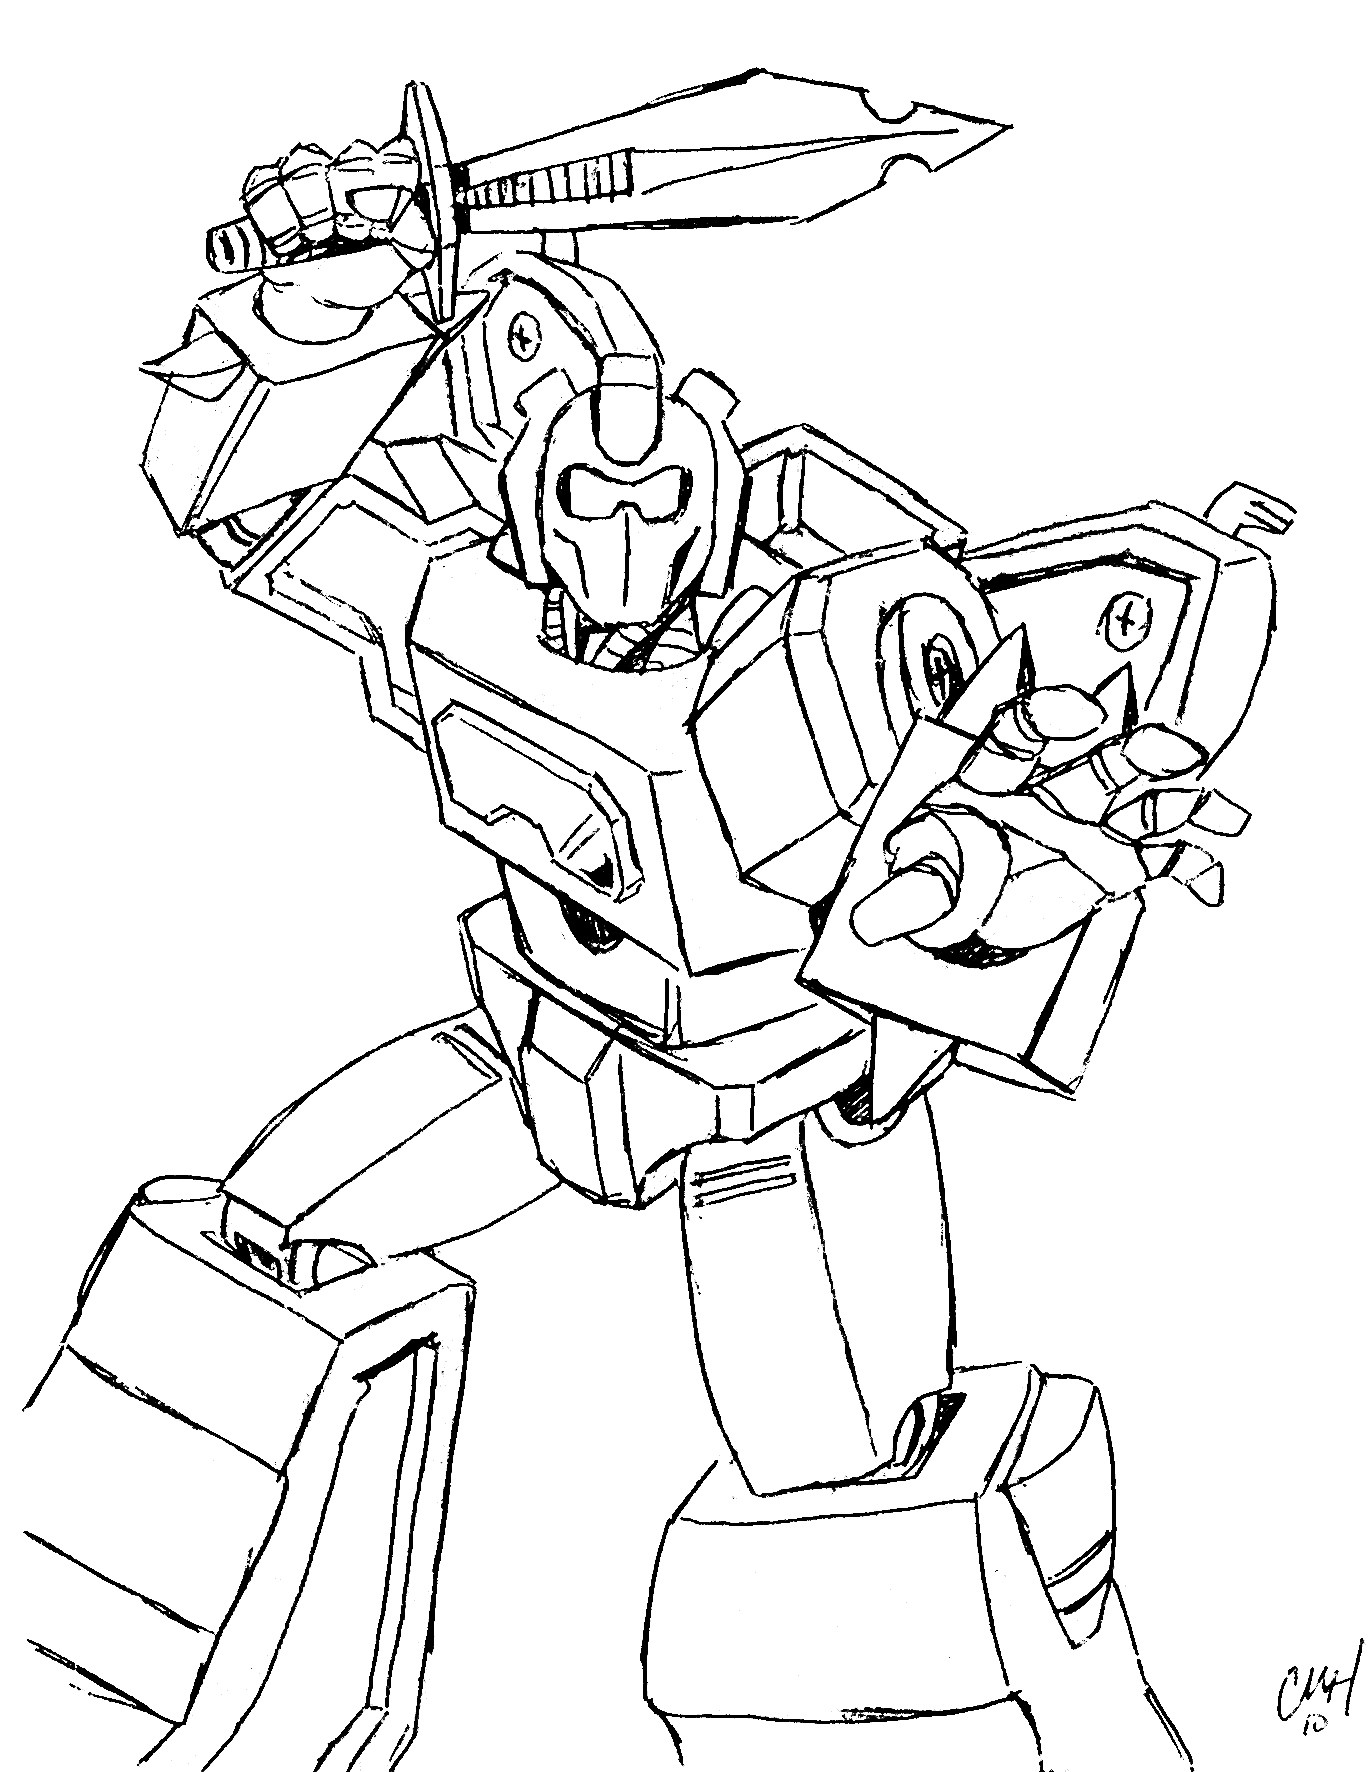 transformers coloring sheets free transformers coloring pages free printable coloring coloring sheets free transformers 